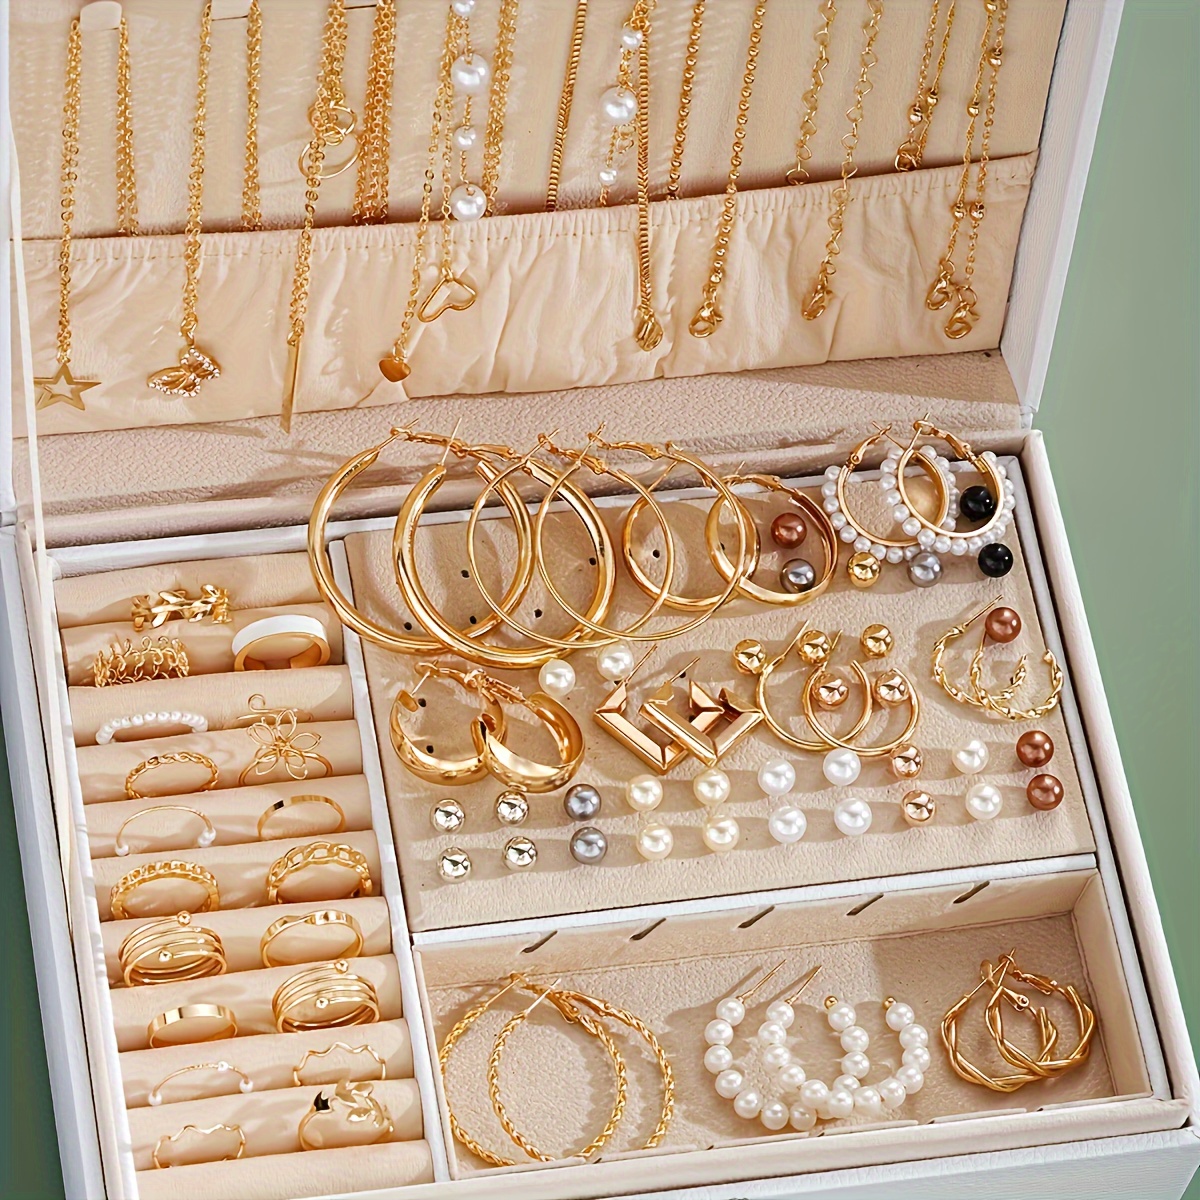 

56pc Elegant Jewelry Set Assorted Necklaces, Rings, Faux Pearl Decor Hoop & Studs Earrings For Women, Vintage & Chic Style, Ideal For Daily Wear & Gift-giving (box Not Included)